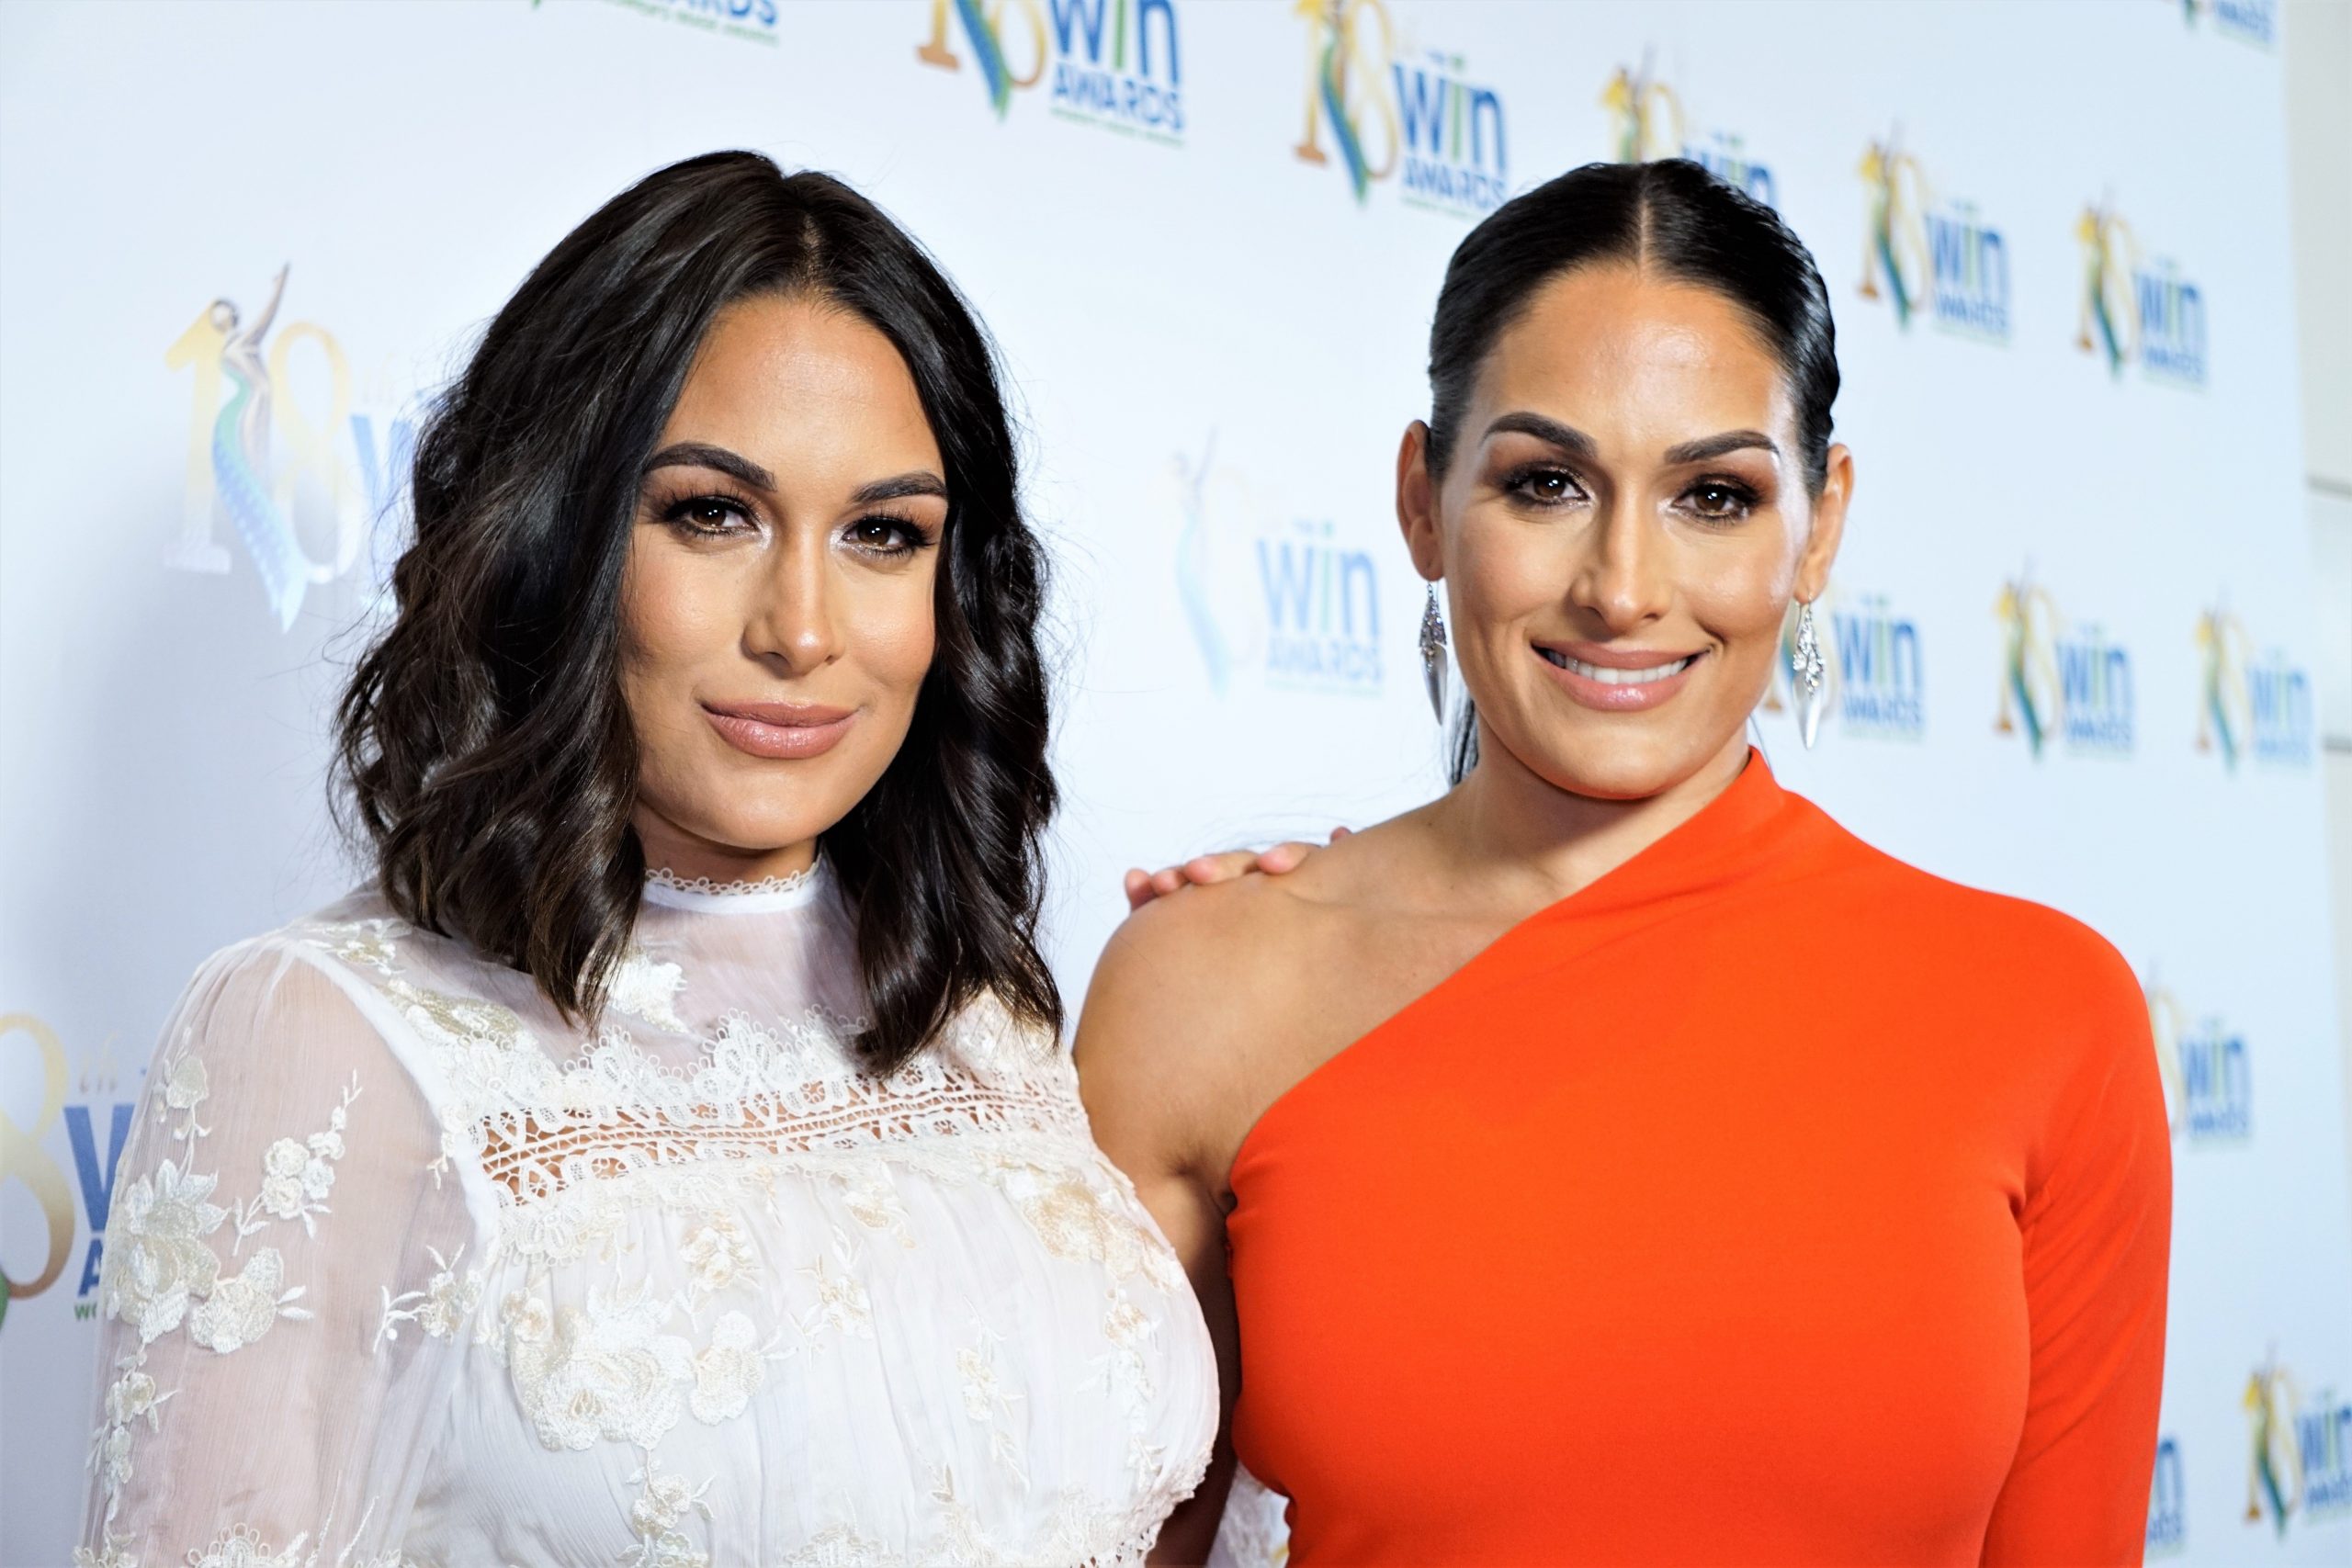 Bella Twins Official For WWE Hall Of Fame, Relive Their Career